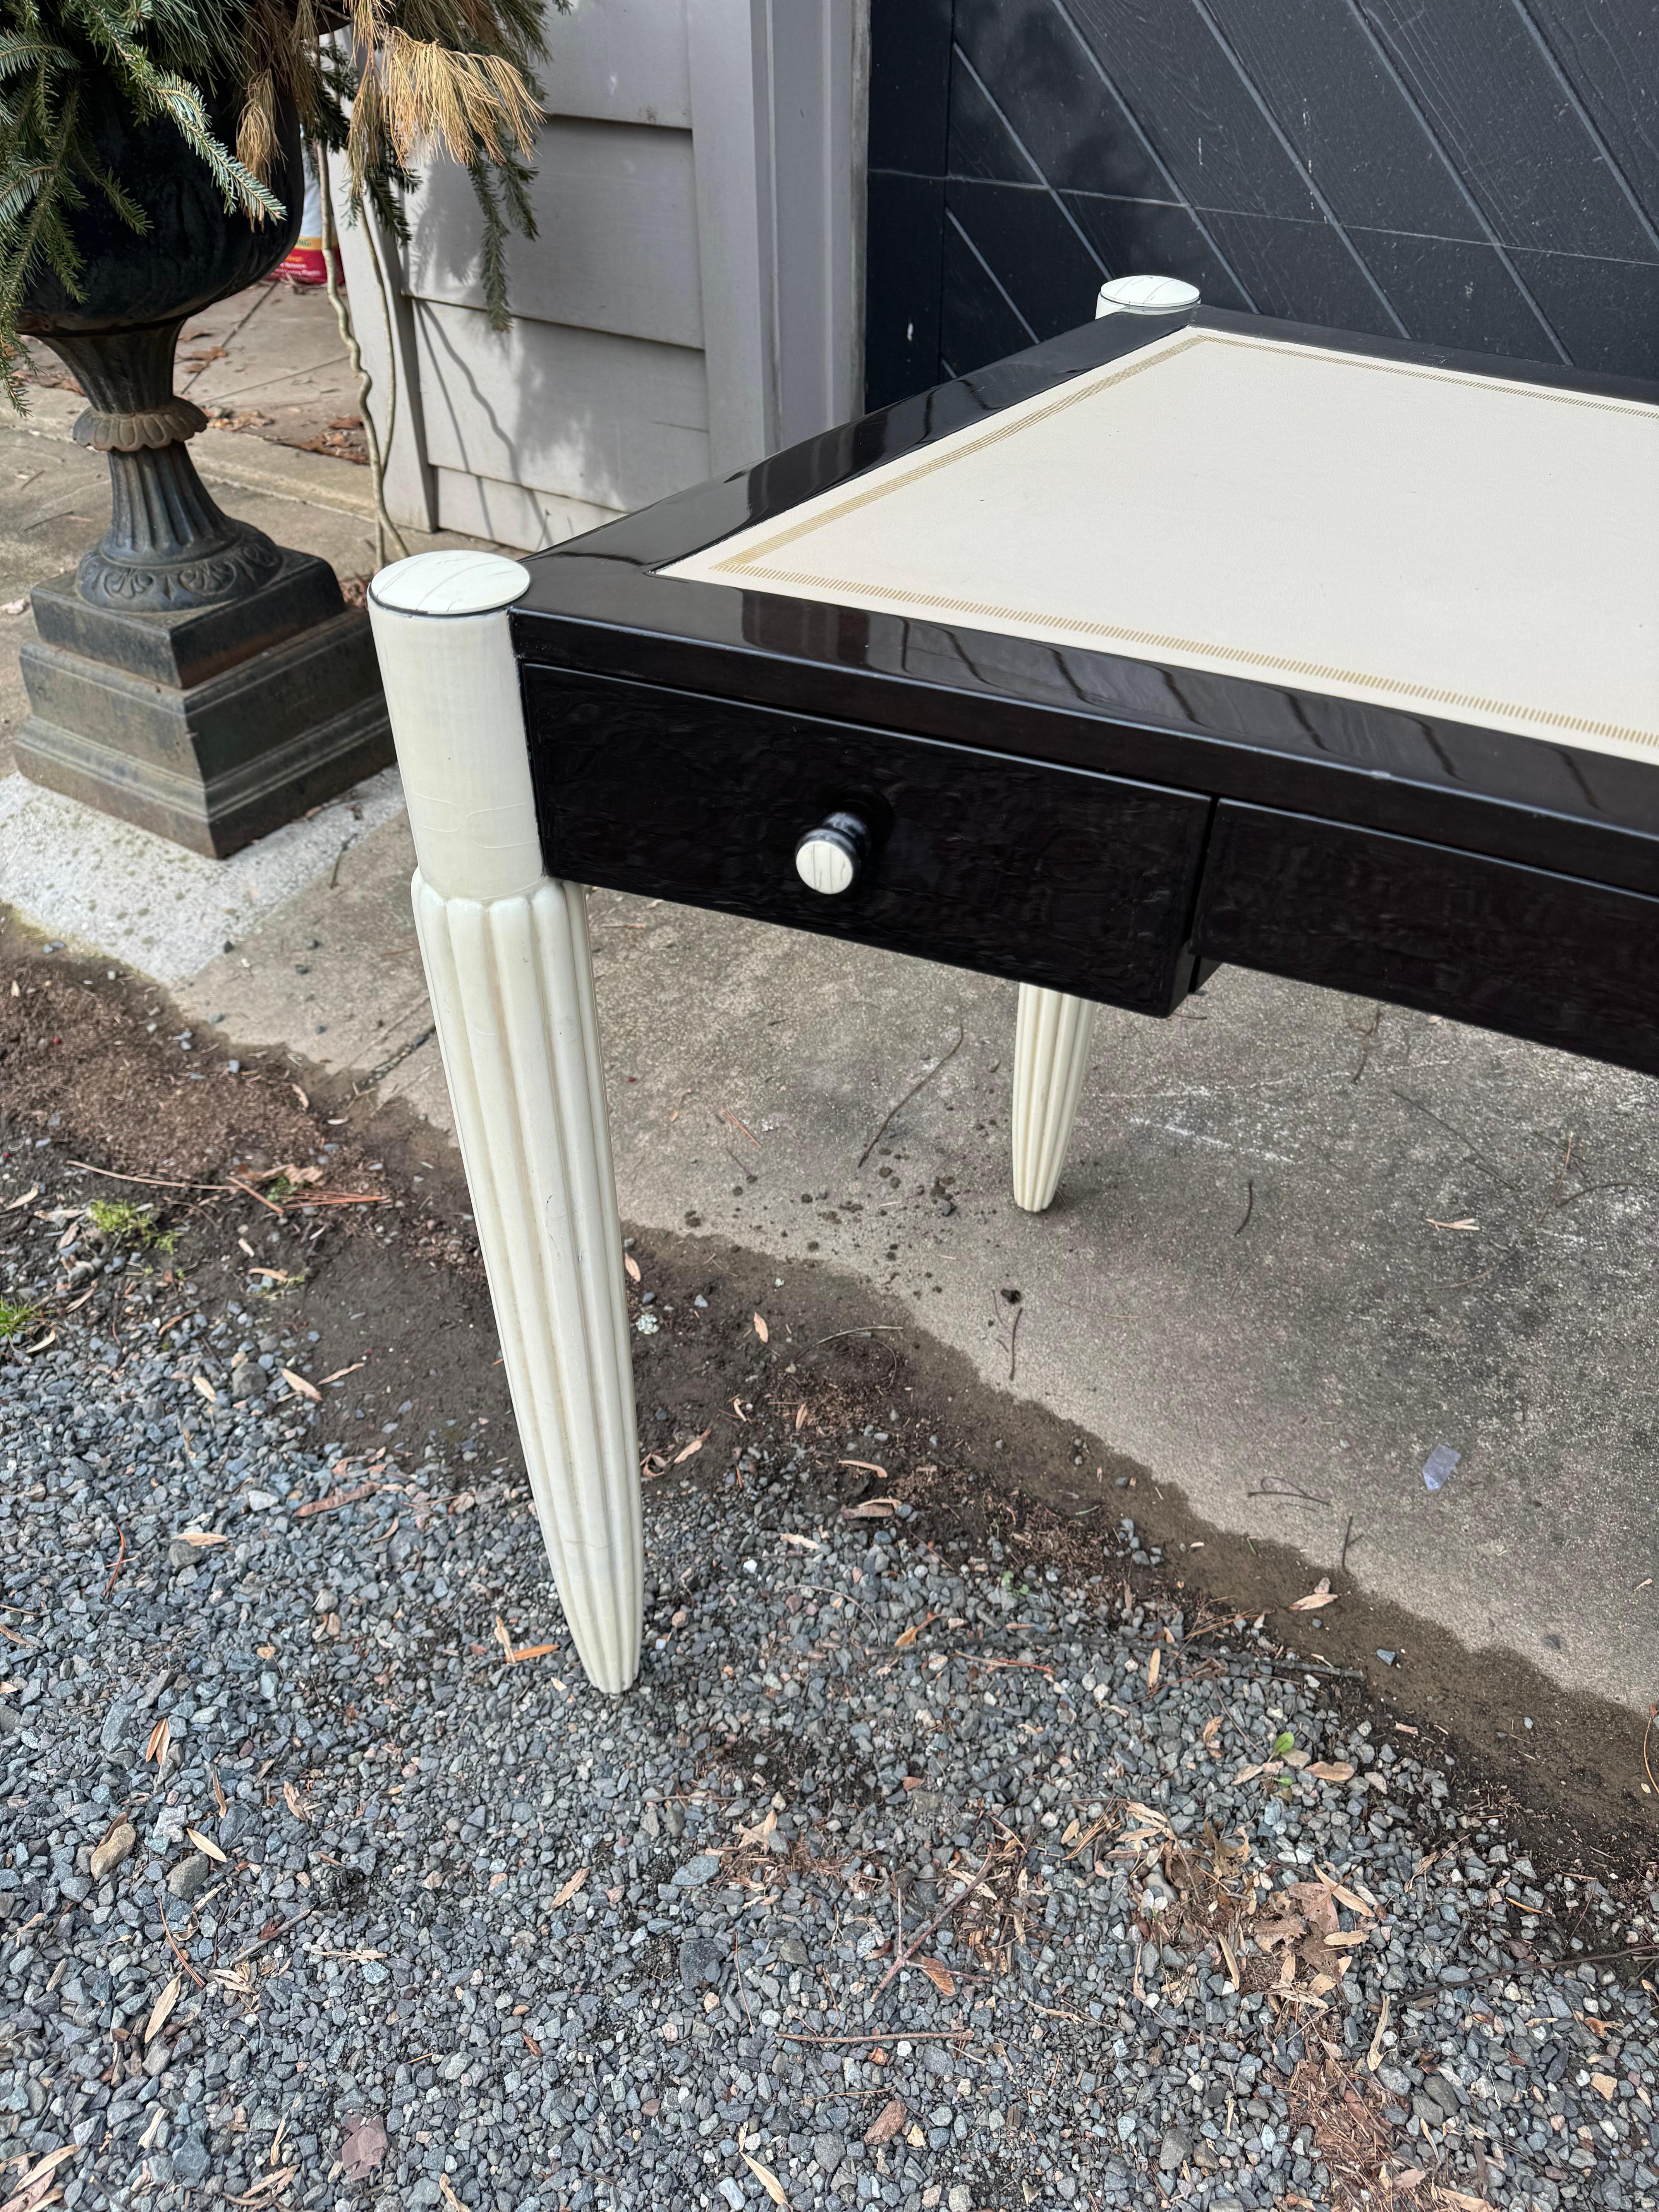 Super chic designer desk by Sally Sirkin for J. Robert Scott, know as the Paris desk.  There are ribbed and tapered legs and a black and ivory enamel finish.  The corner, knobs and keyhole have a faux bone appearance and the leather top is ivory